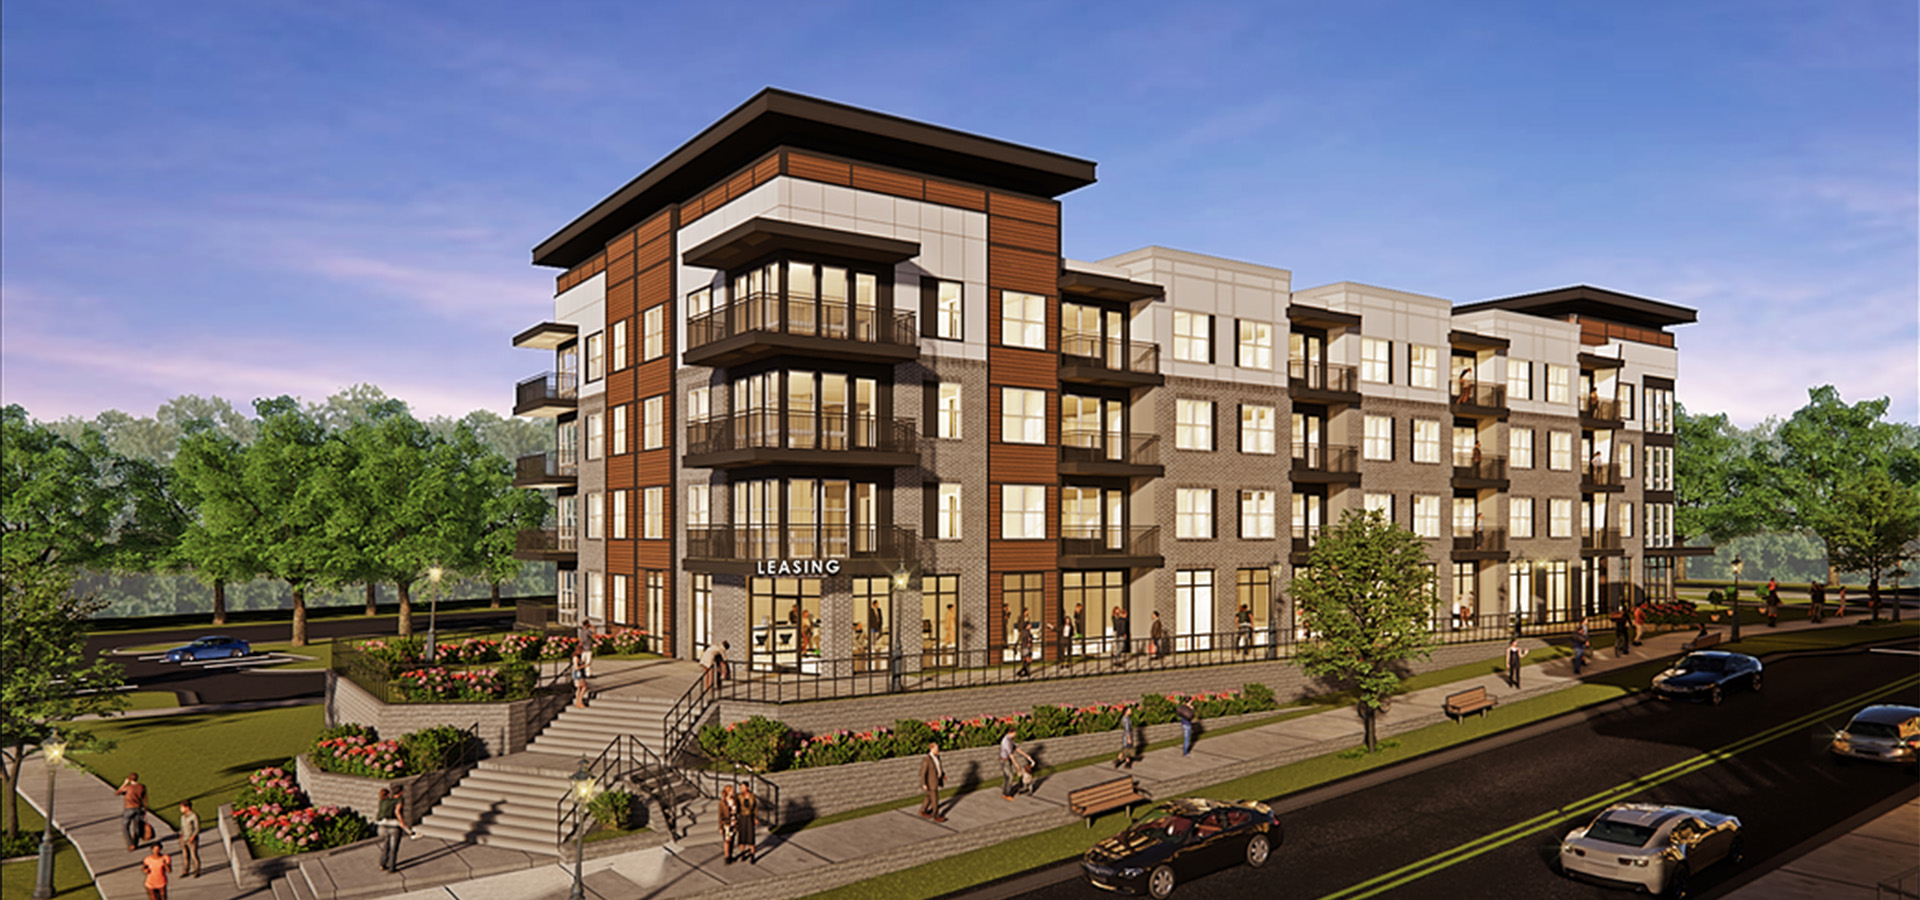 McShane to Build 397 Apartments in Charlotte, NC